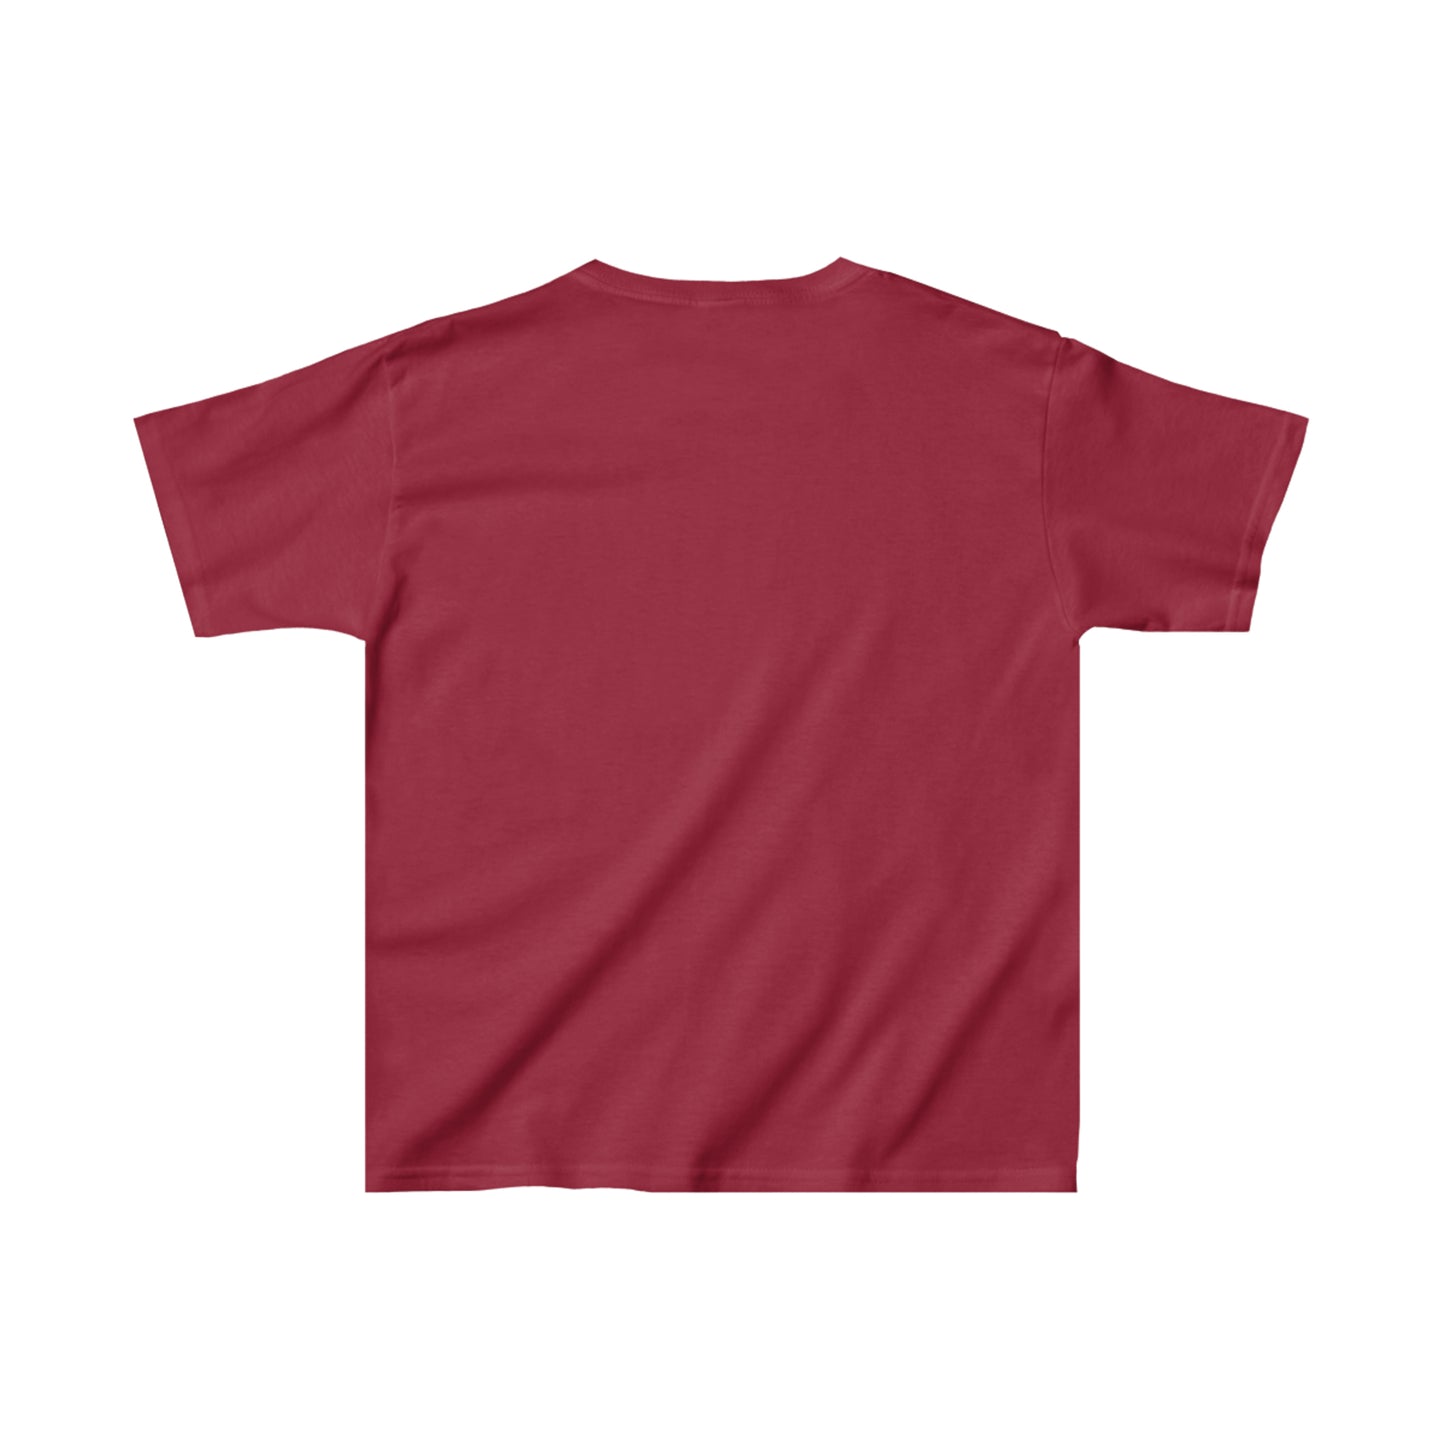 Talking Time With Caffeine Kids Heavy Cotton™ Tee